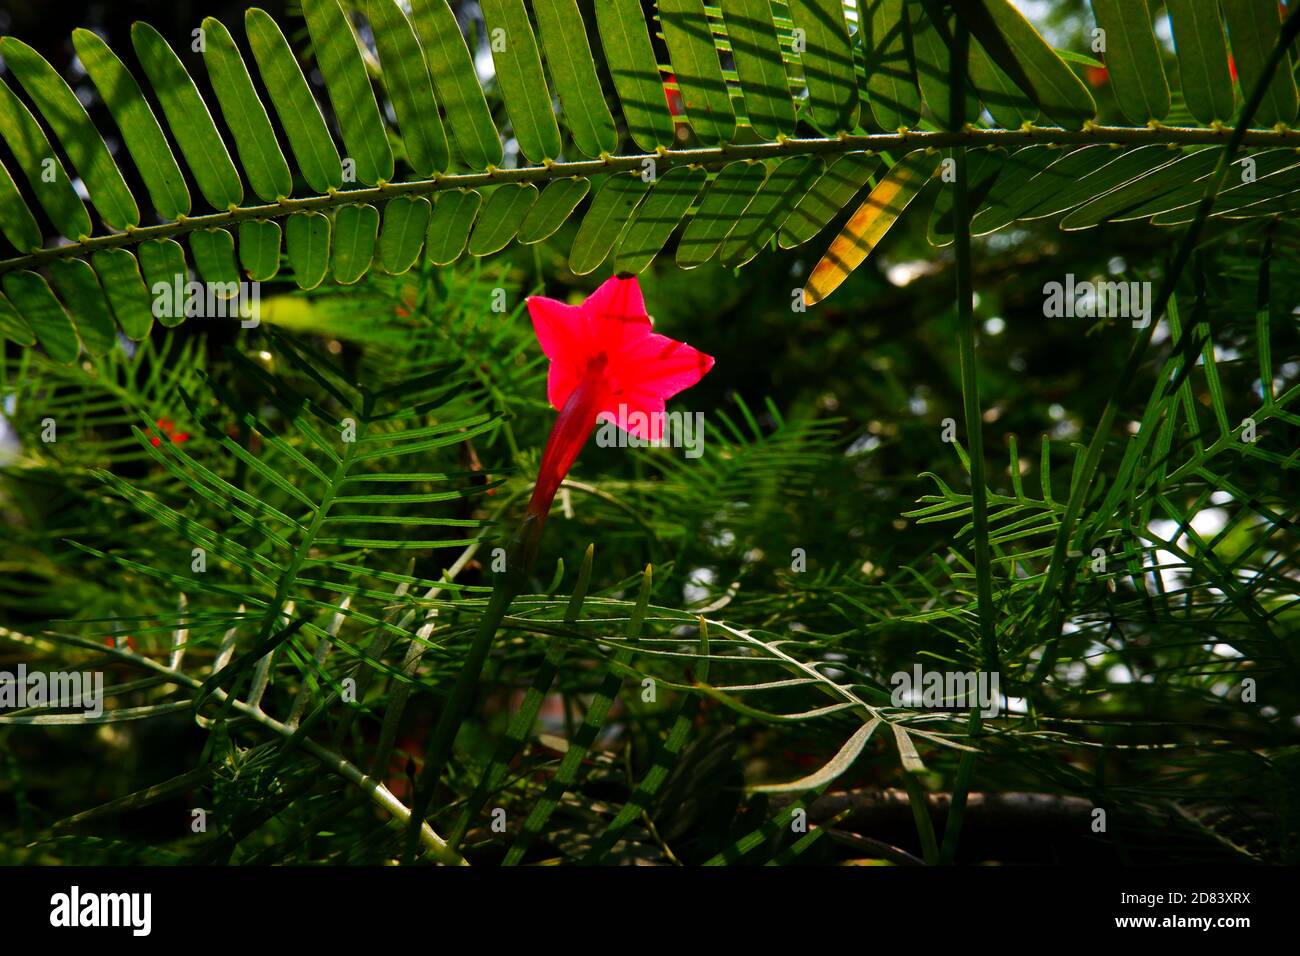 a closeup view of cypress vine (Ipomoclit species) flower isolated on plant in garden Stock Photo